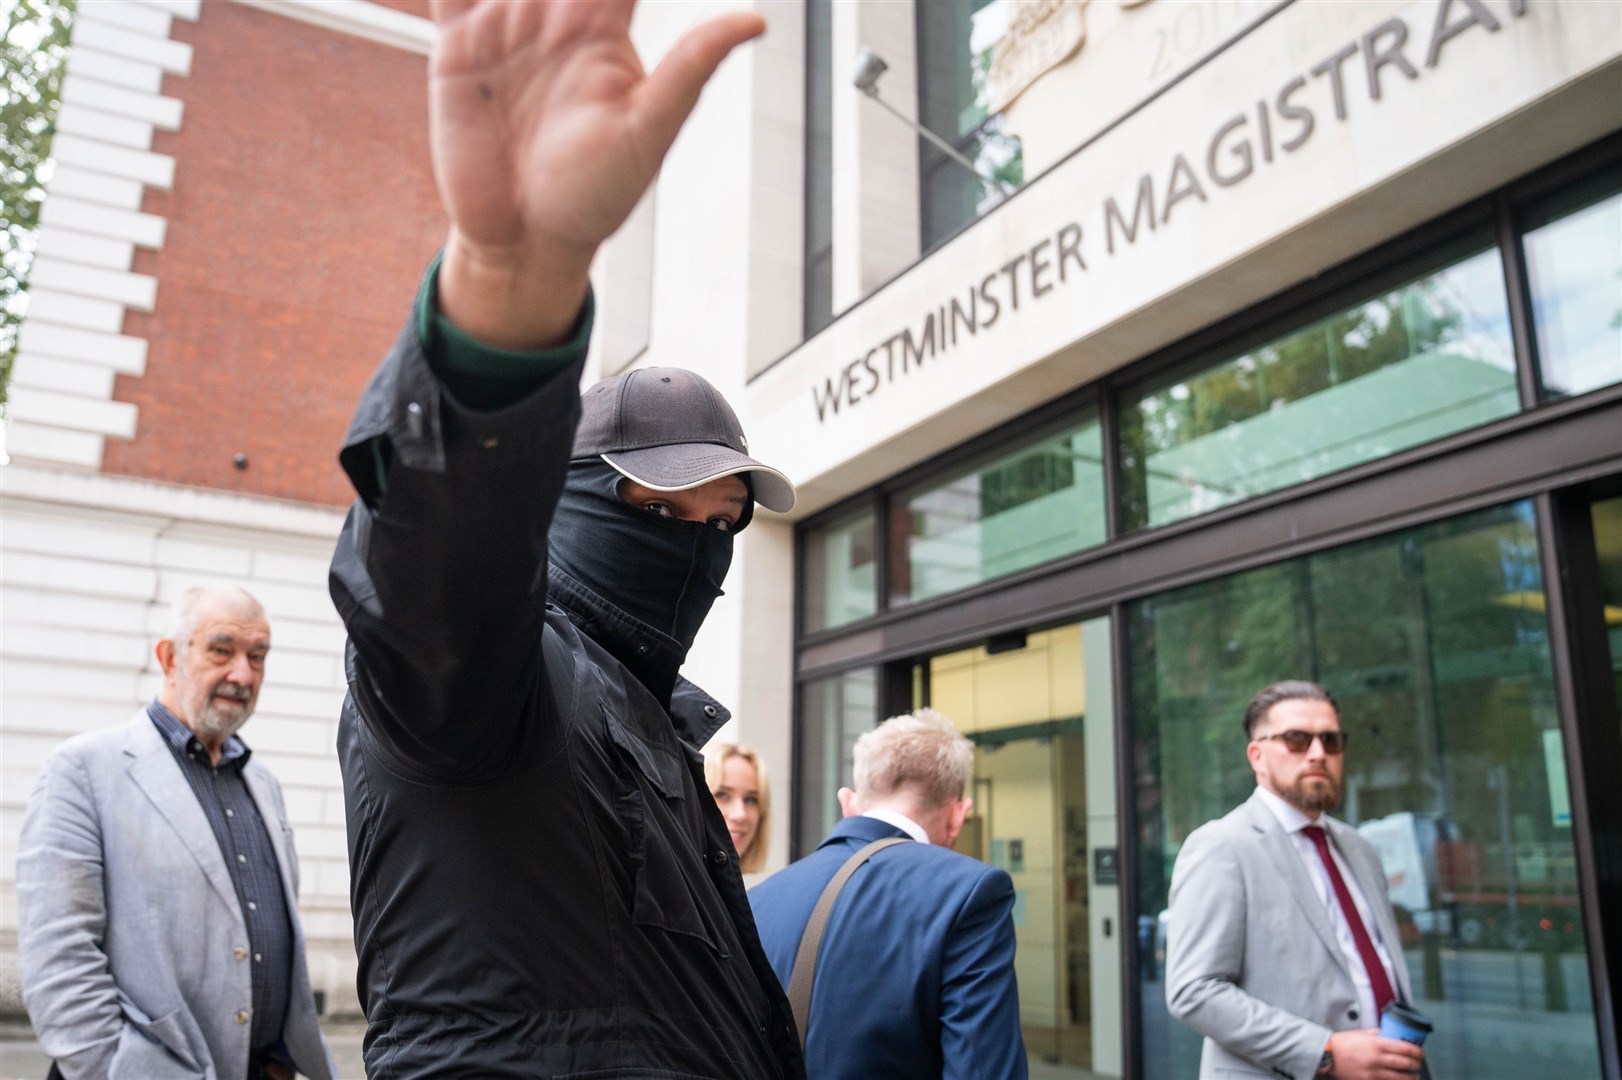 Metropolitan Police officer Thomas Phillips, with his face covered, arrives at Westminster Magistrates’ Court for sentencing (James Manning/PA)